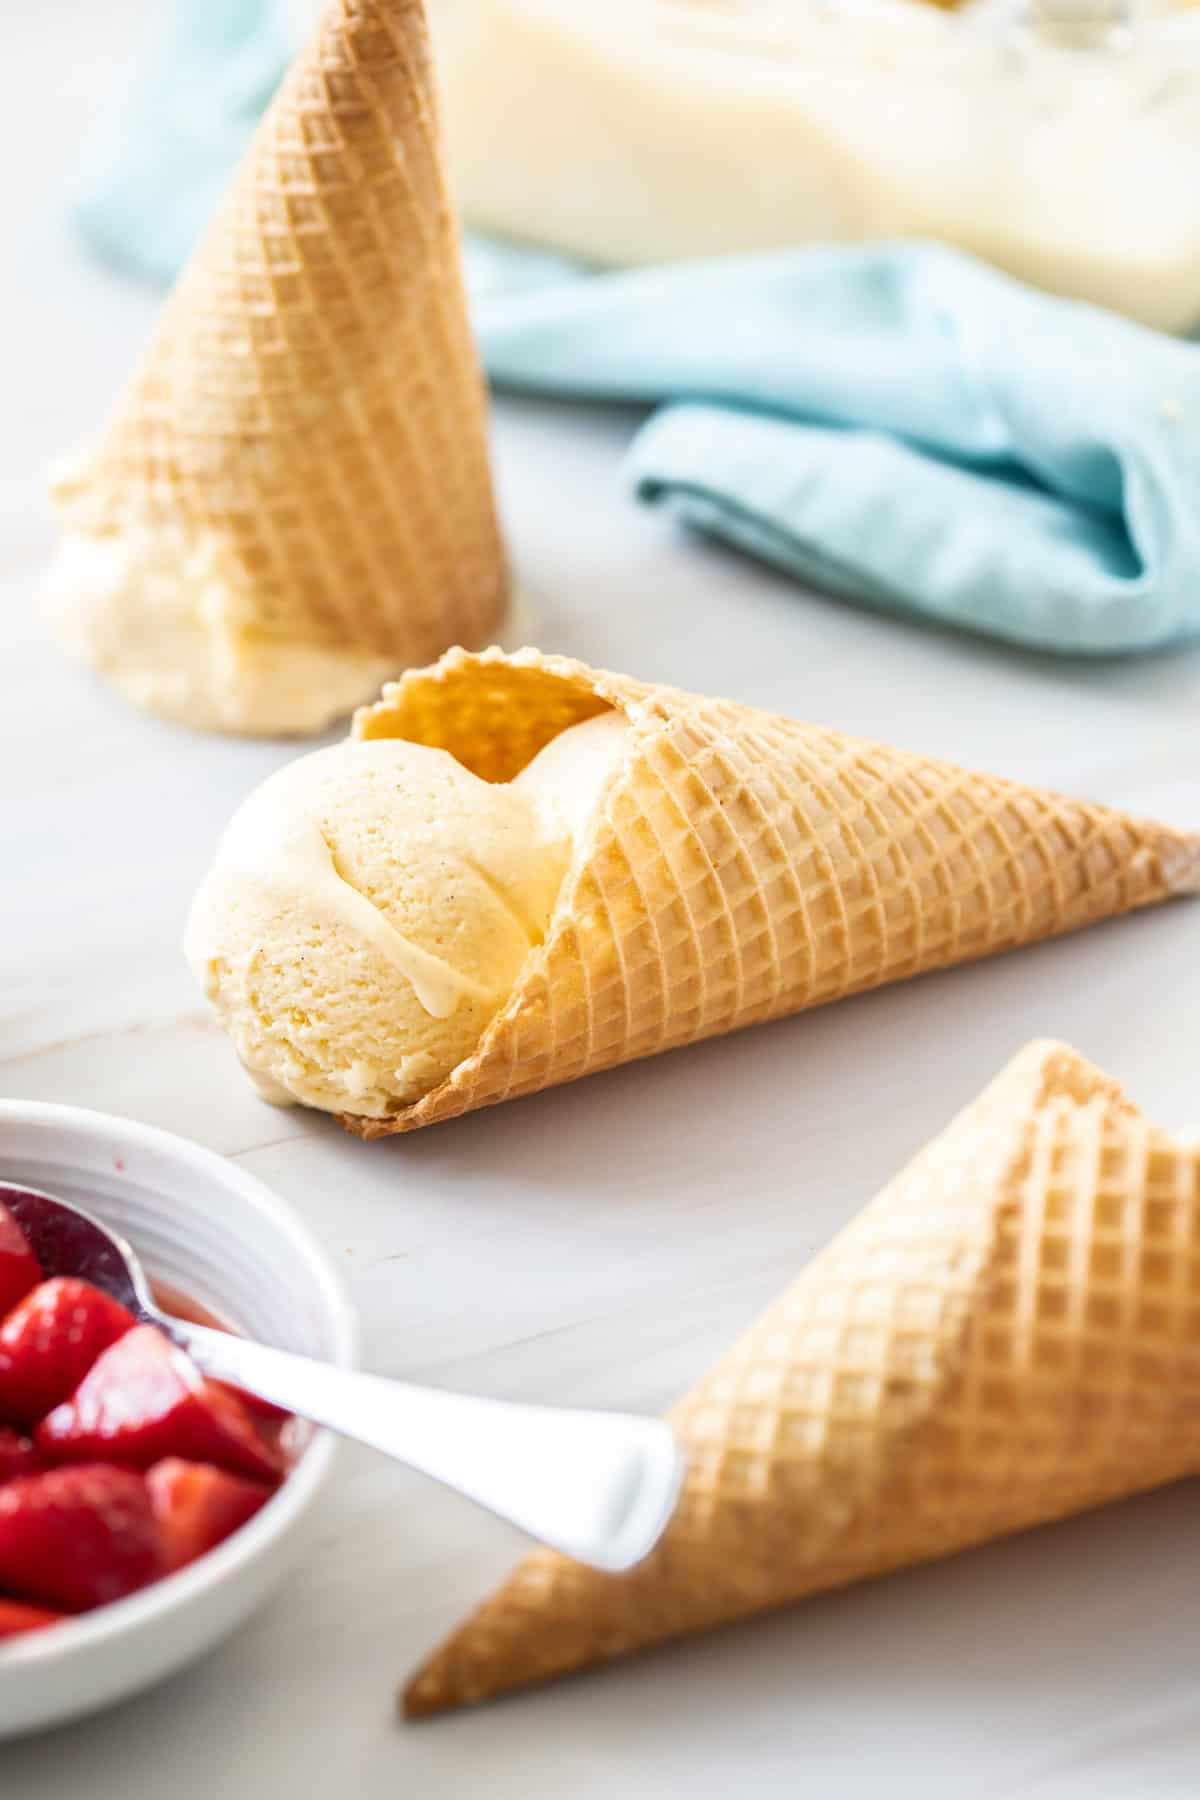 three ice cream cones, one with ice cream, with a bowl of strawberries on the side.